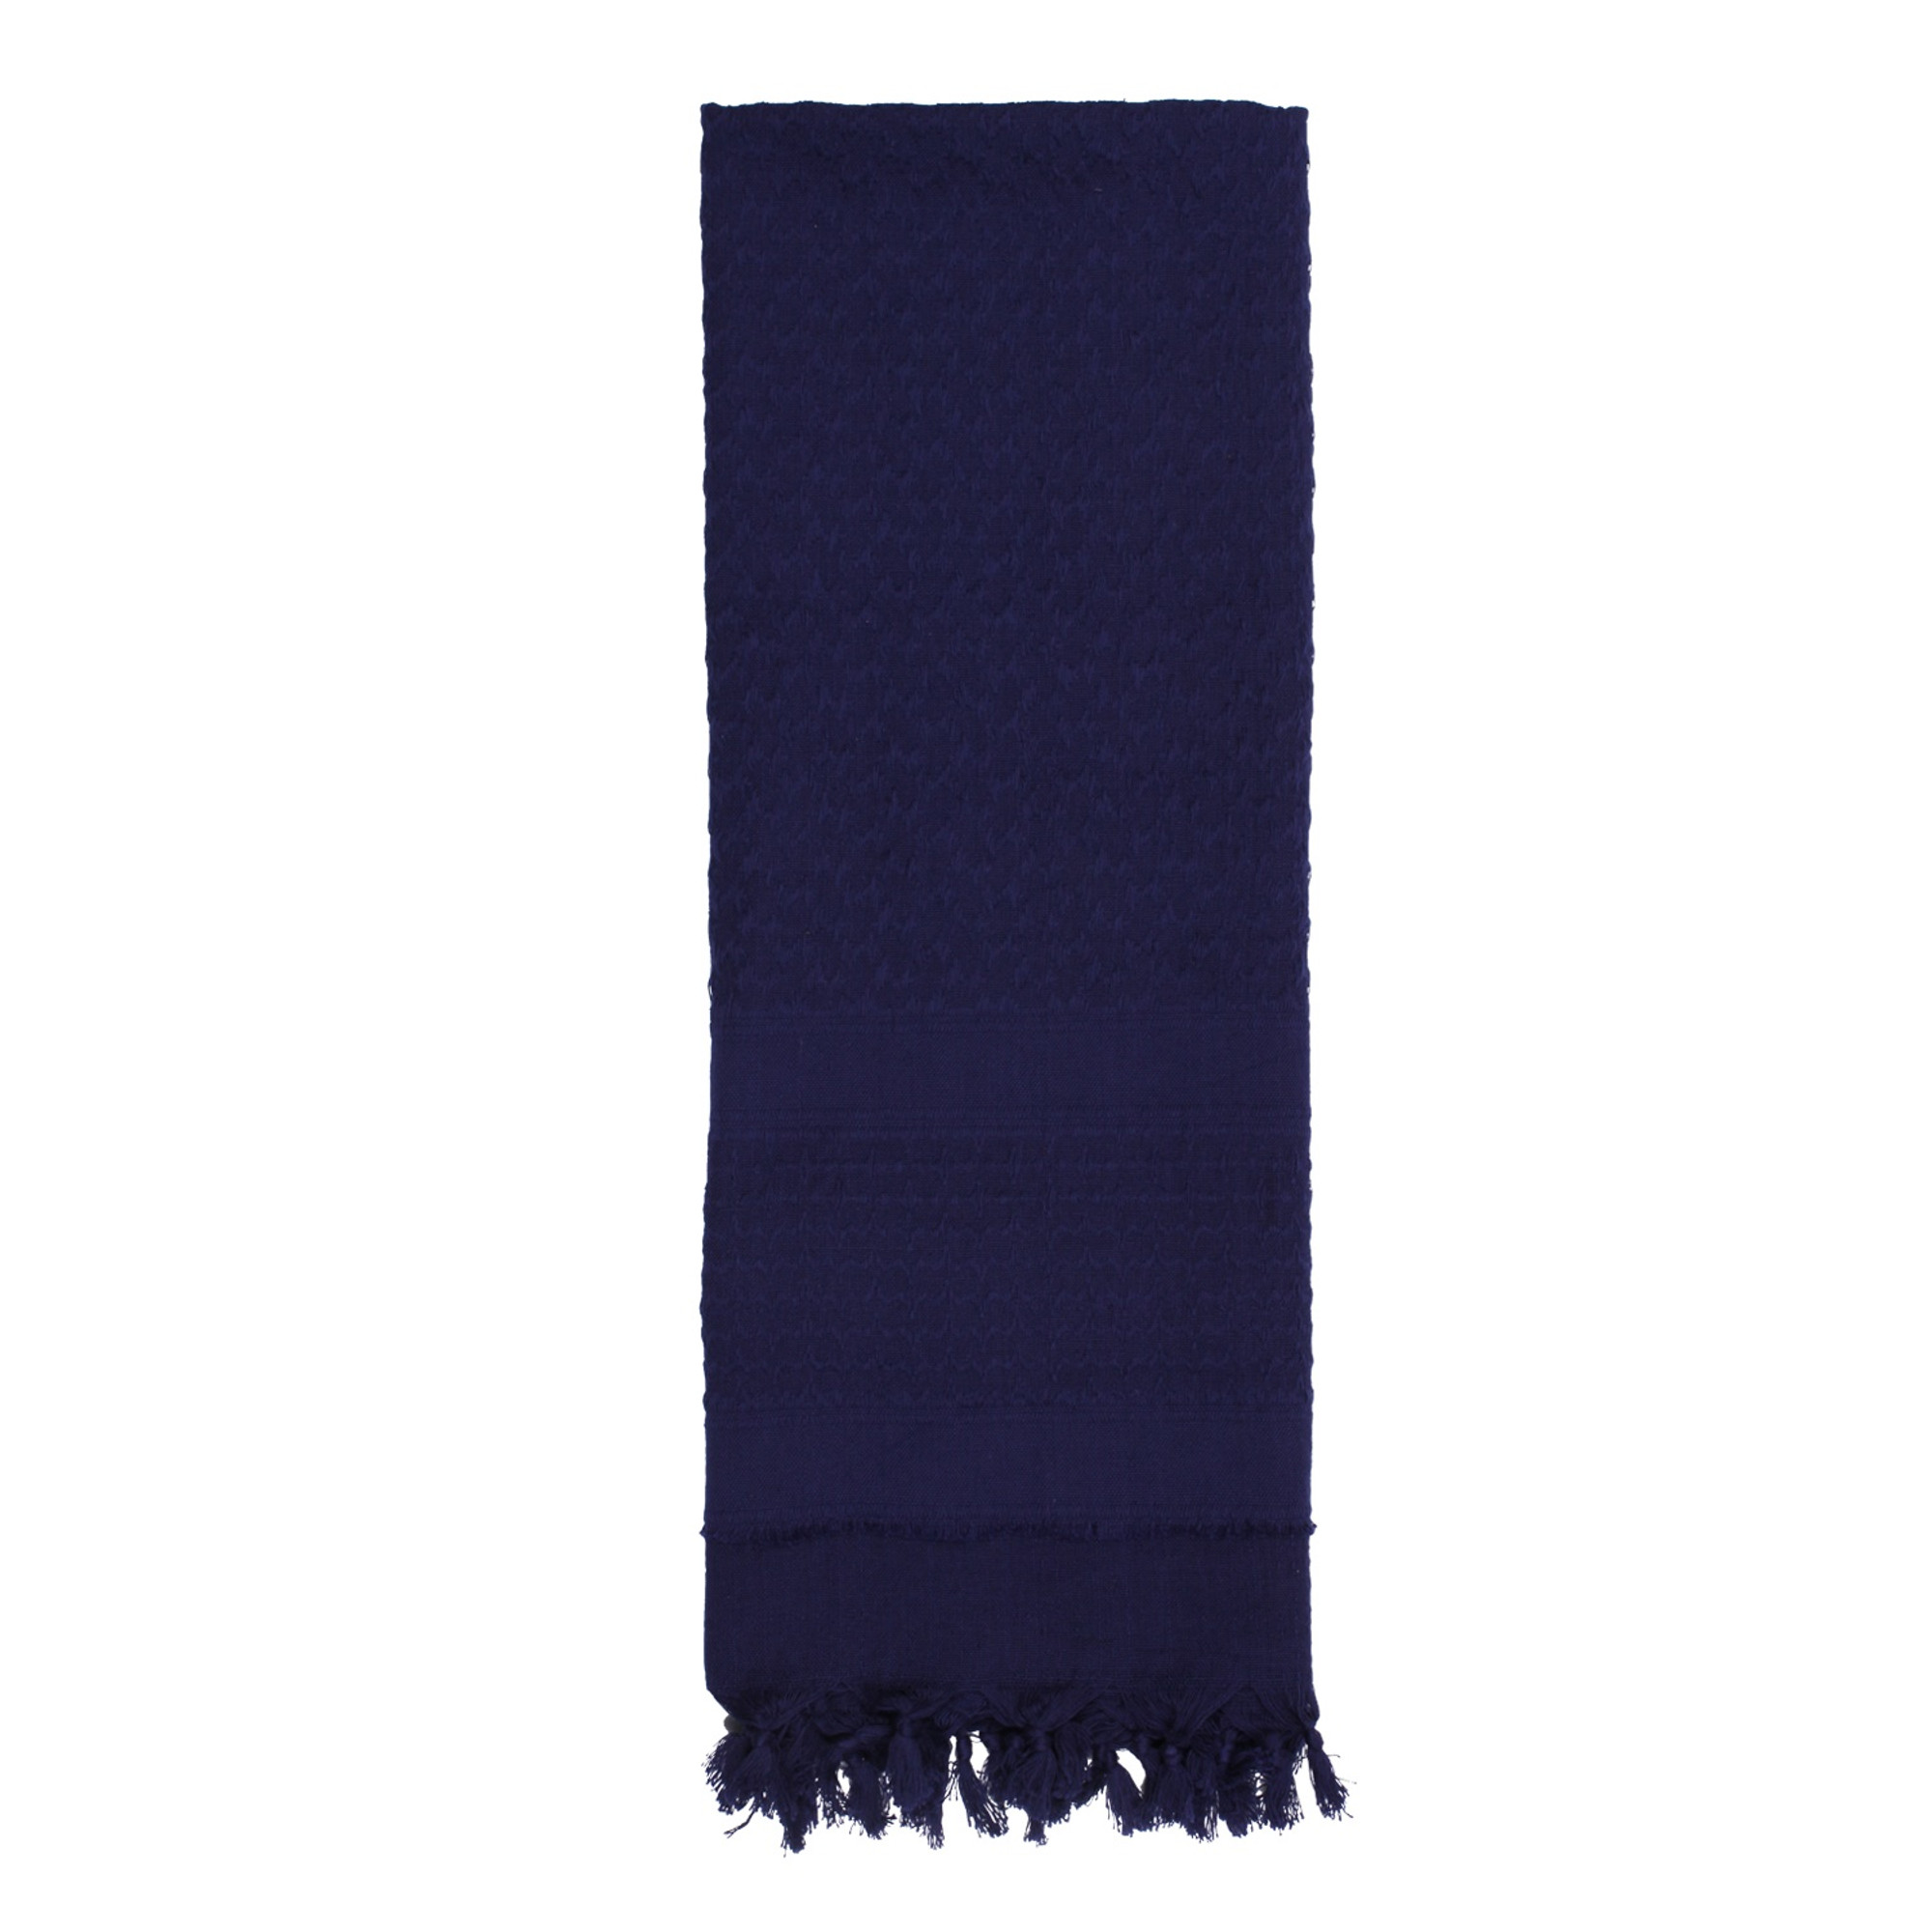 Rothco Solid Color Shemagh Tactical Desert Keffiyeh Scarf - Navy Blue